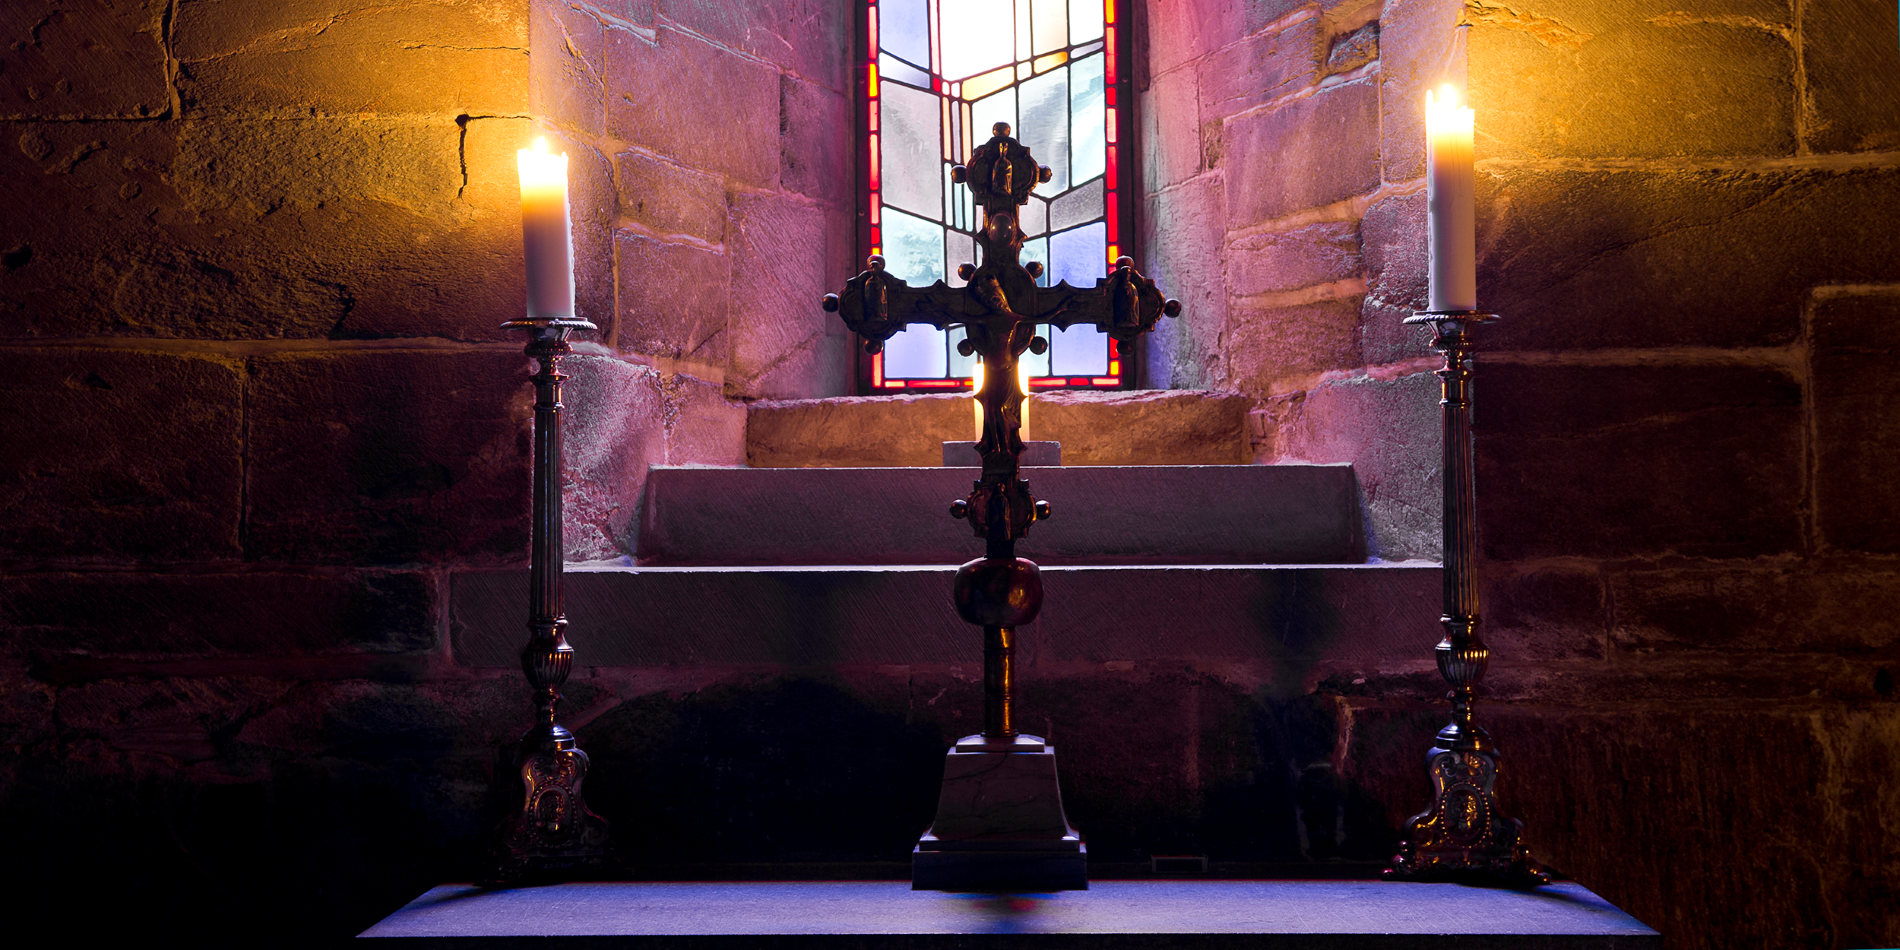 The hidden rooms of Nidaros Cathedral. The picture shows a cross and two lit candles inside Nidaros Cathedral